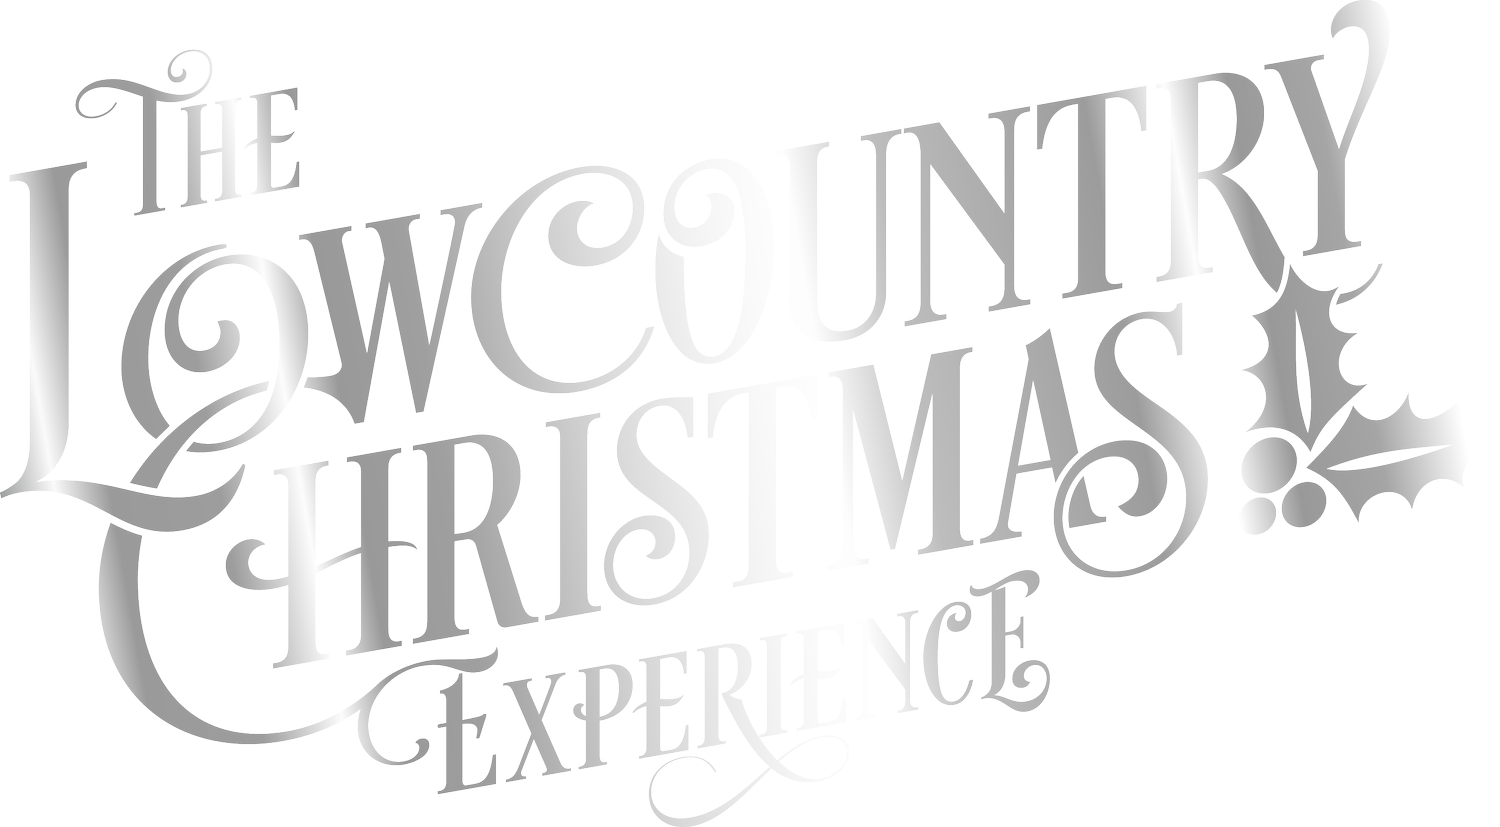 Lowcountry Christmas Experience